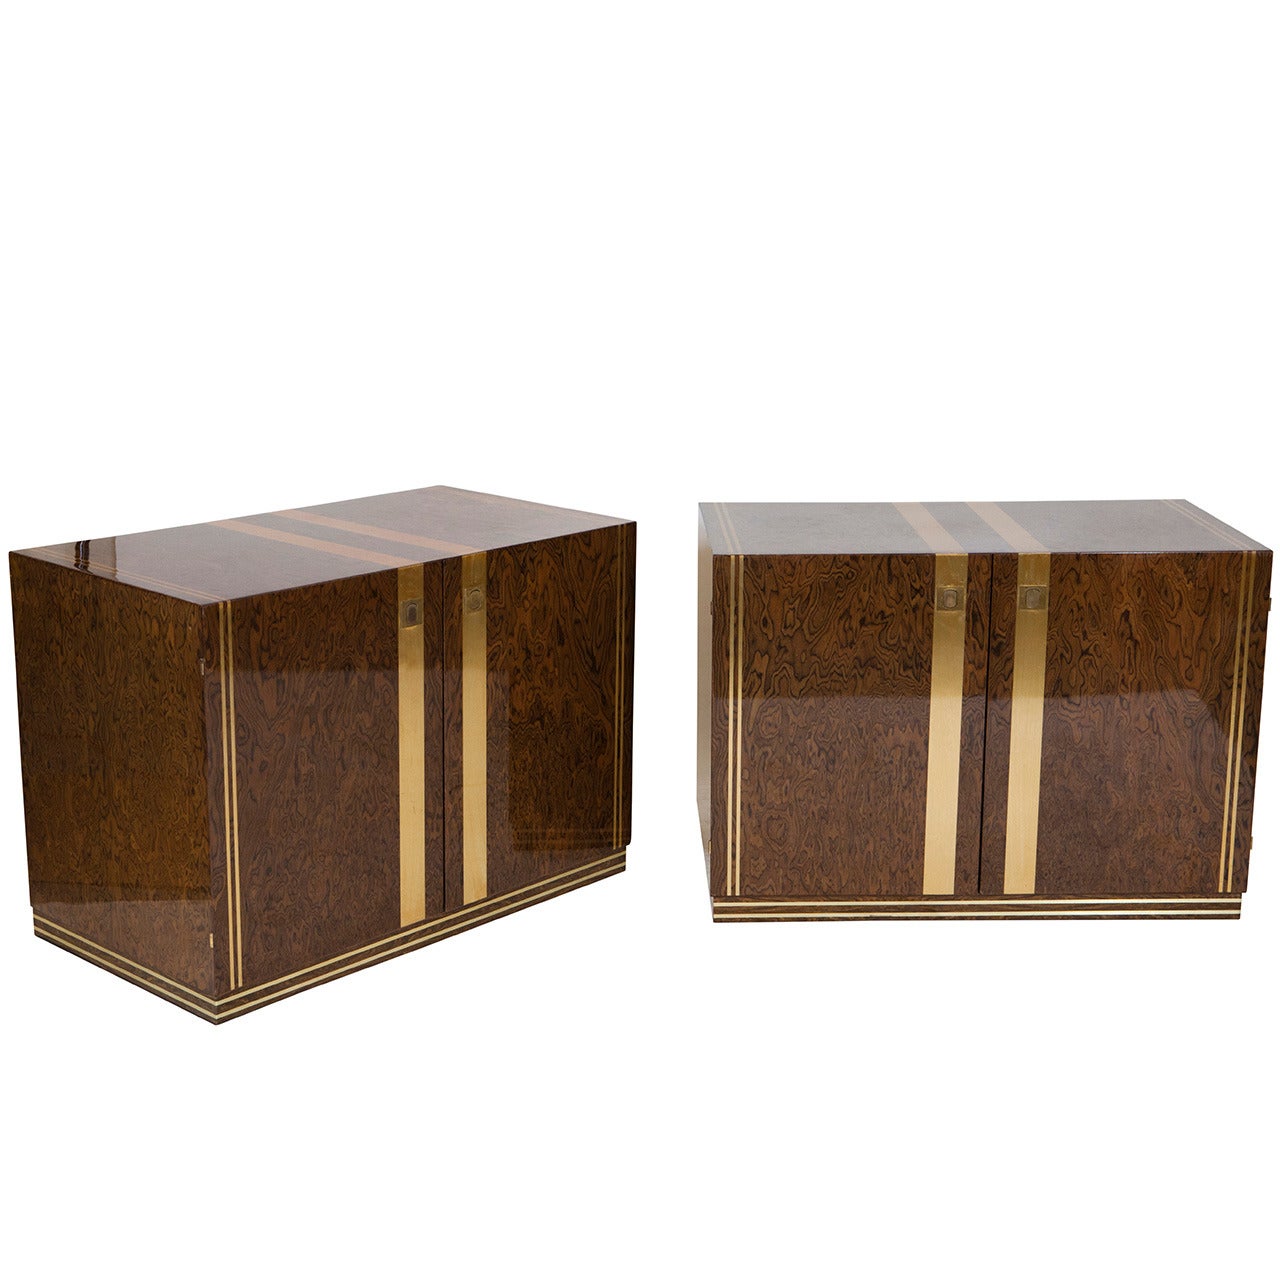 Pair of Burl Wood and Brass Inlaid Nightstands